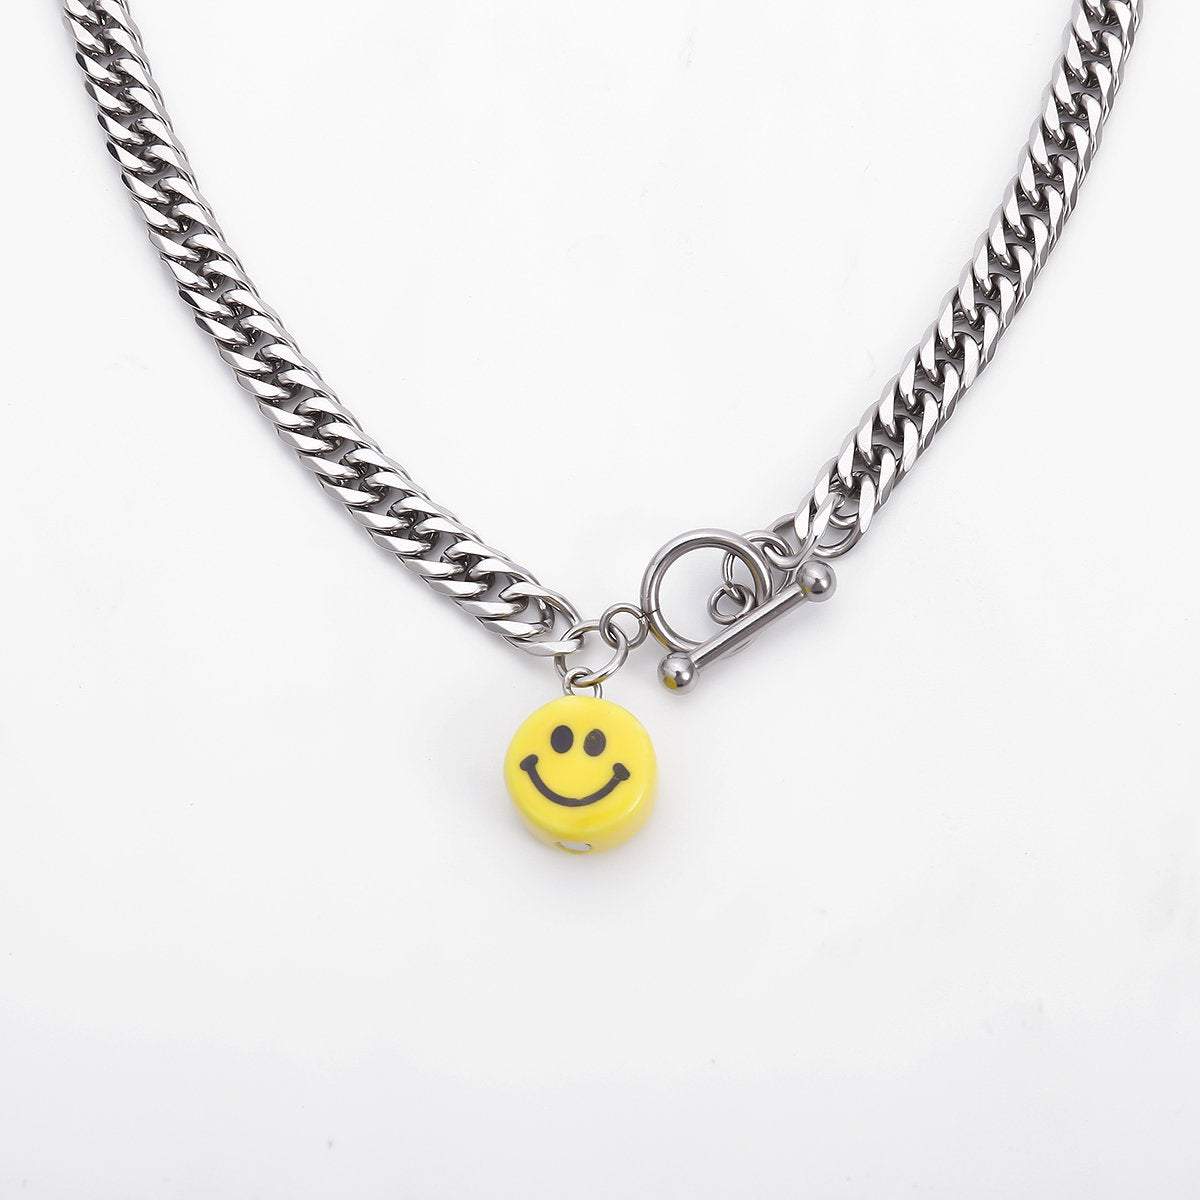 Stainless Steel Smile Face Toggle Clasp Curb Link Chain Necklace - ArtGalleryZen